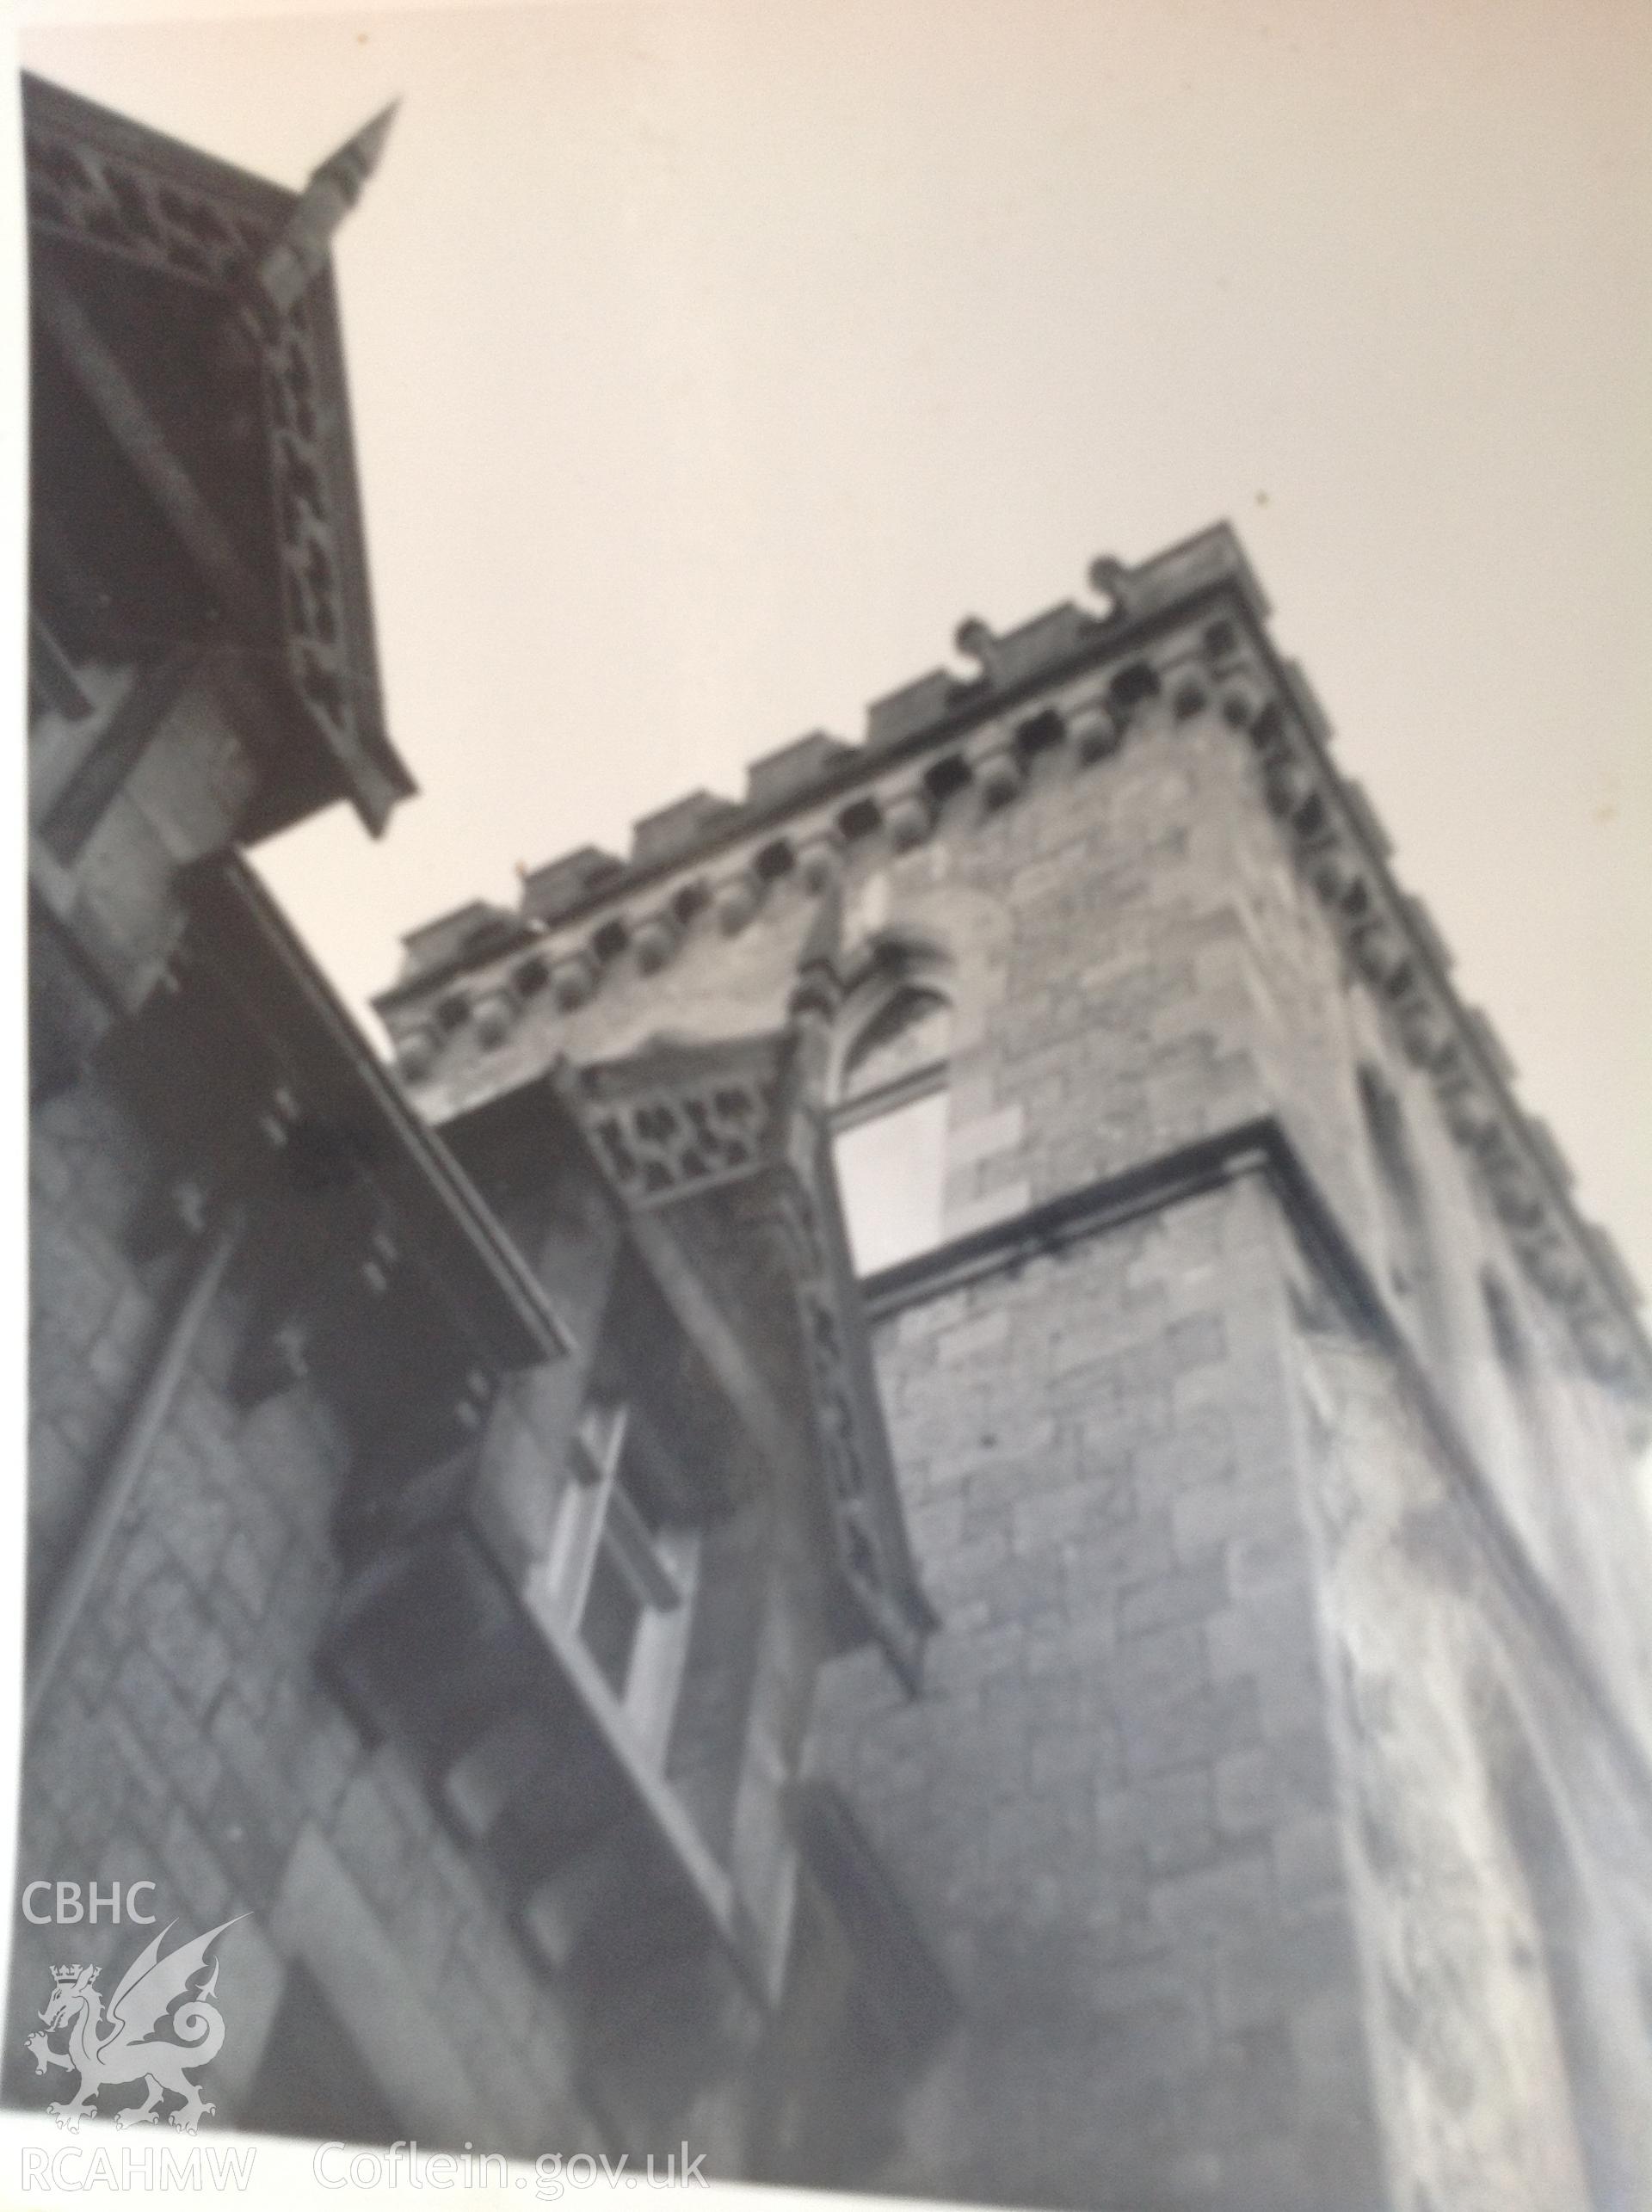 Digital copy of photograph showing detailed exterior view wall and windows at Bryngwenallt Hall, taken in the late 1950s. Digital copy donated by Gillian Swan, January 2022.